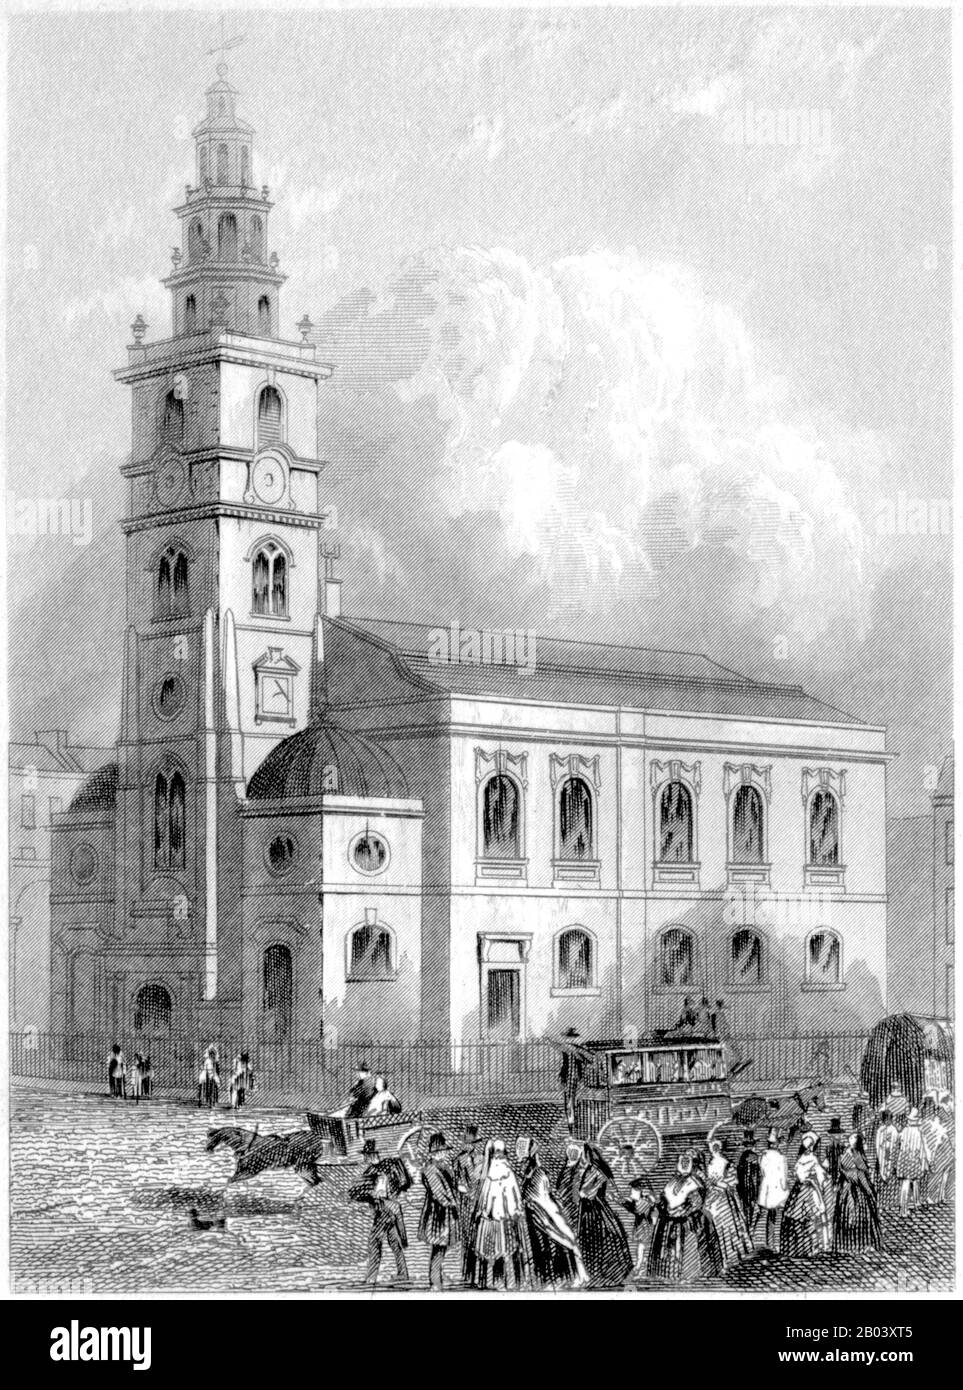 An engraving of St Clement Danes, The Strand, London scanned at high resolution from a book printed in 1851. Believed copyright free. Stock Photo